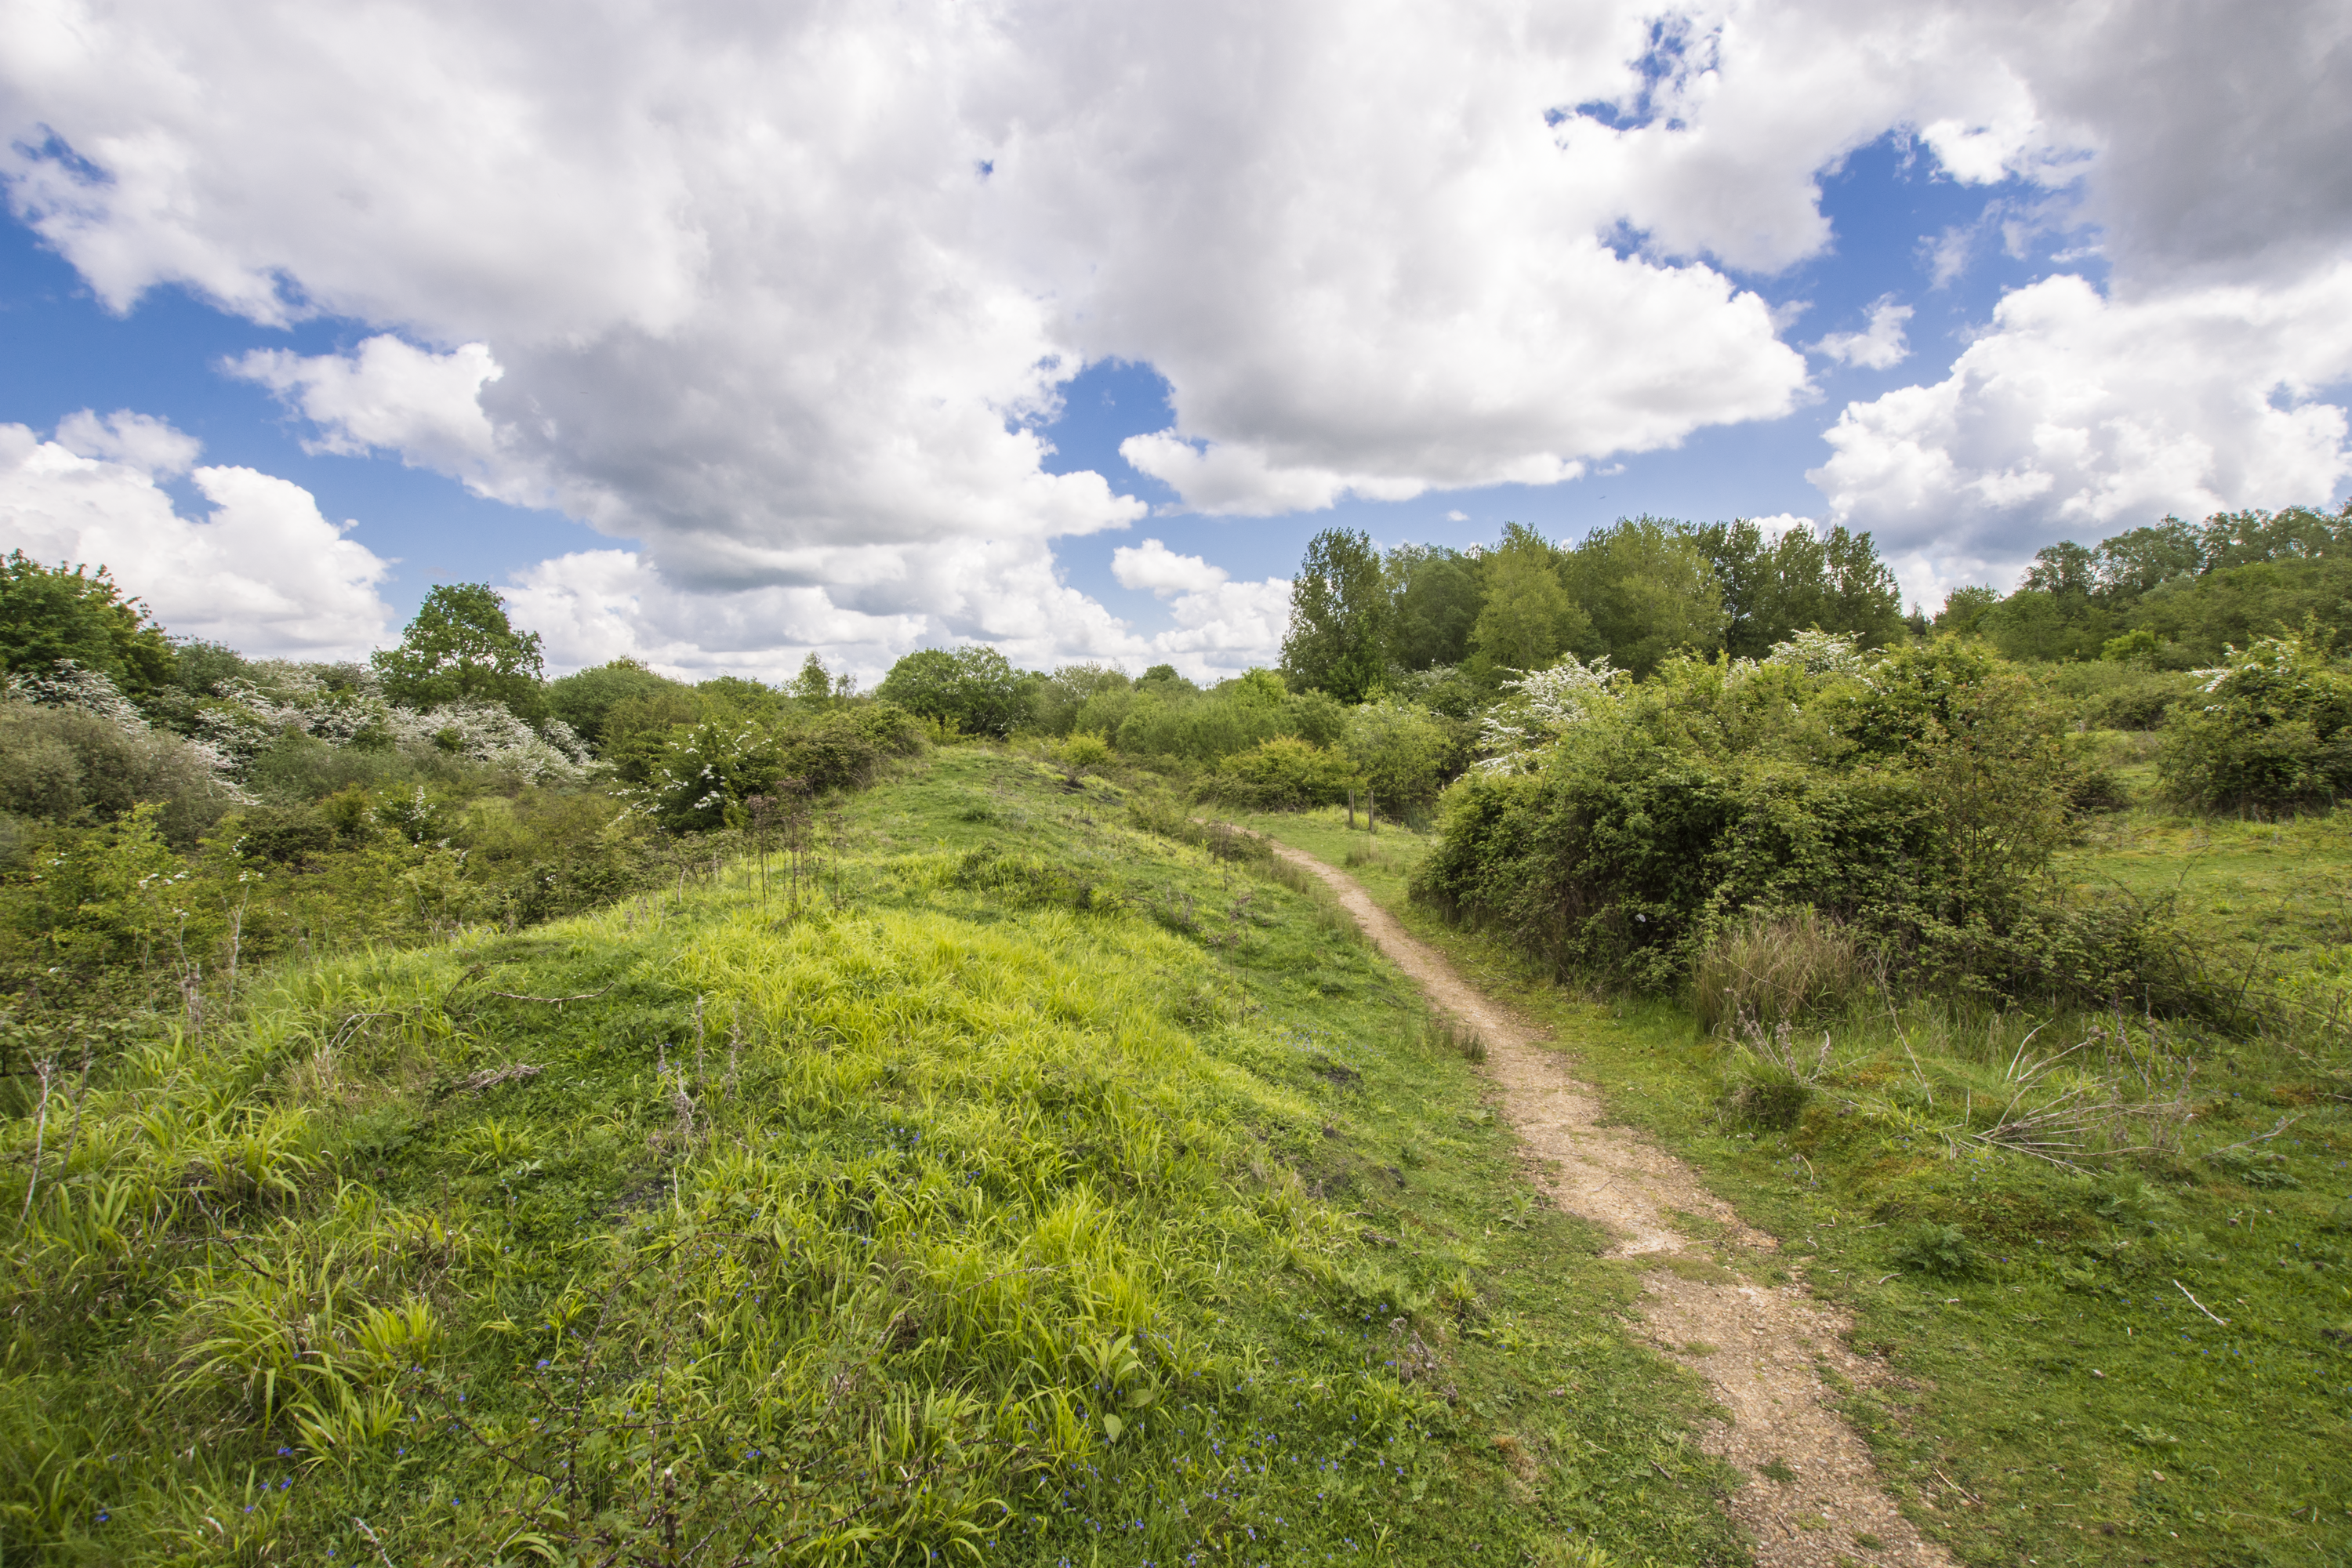 A photograph of Ufton Fields Nature Reserve, showing grassy hills with a cloudy blue sky